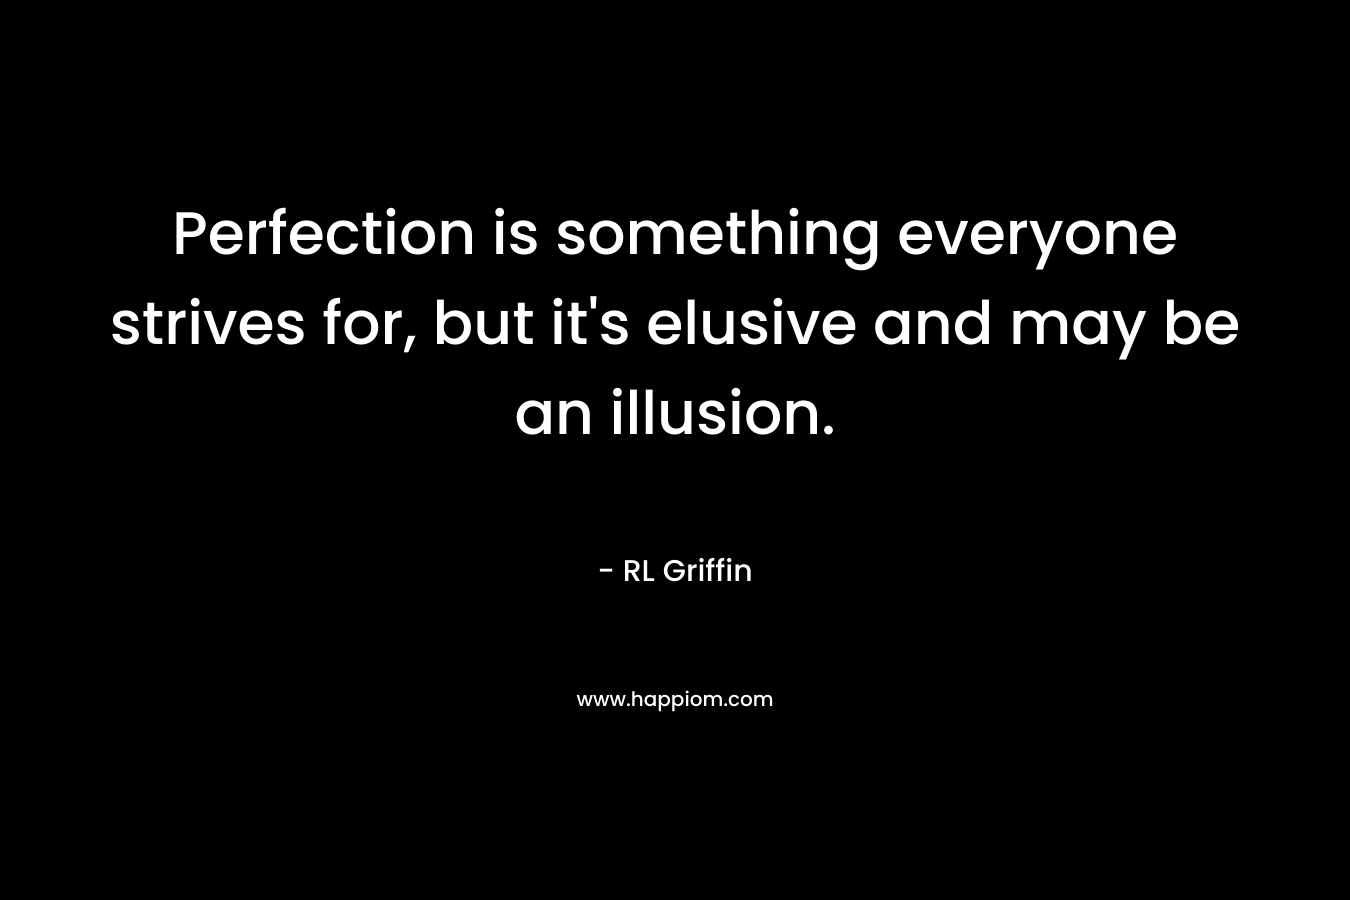 Perfection is something everyone strives for, but it’s elusive and may be an illusion. – RL Griffin